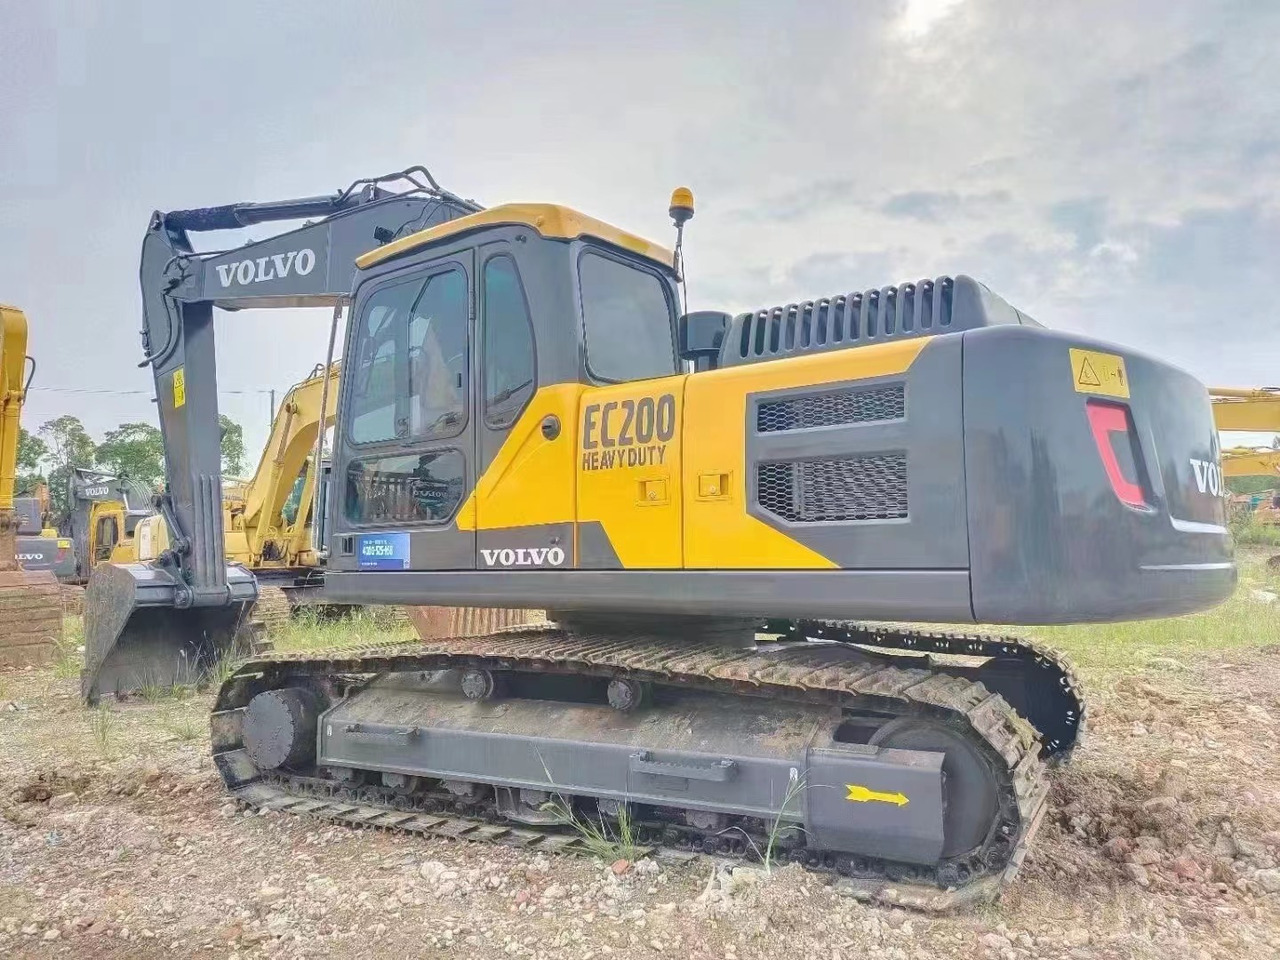 Used excavator VOLVO EC200, Large engineering construction machinery good condition on sale lizingą Used excavator VOLVO EC200, Large engineering construction machinery good condition on sale: foto 2